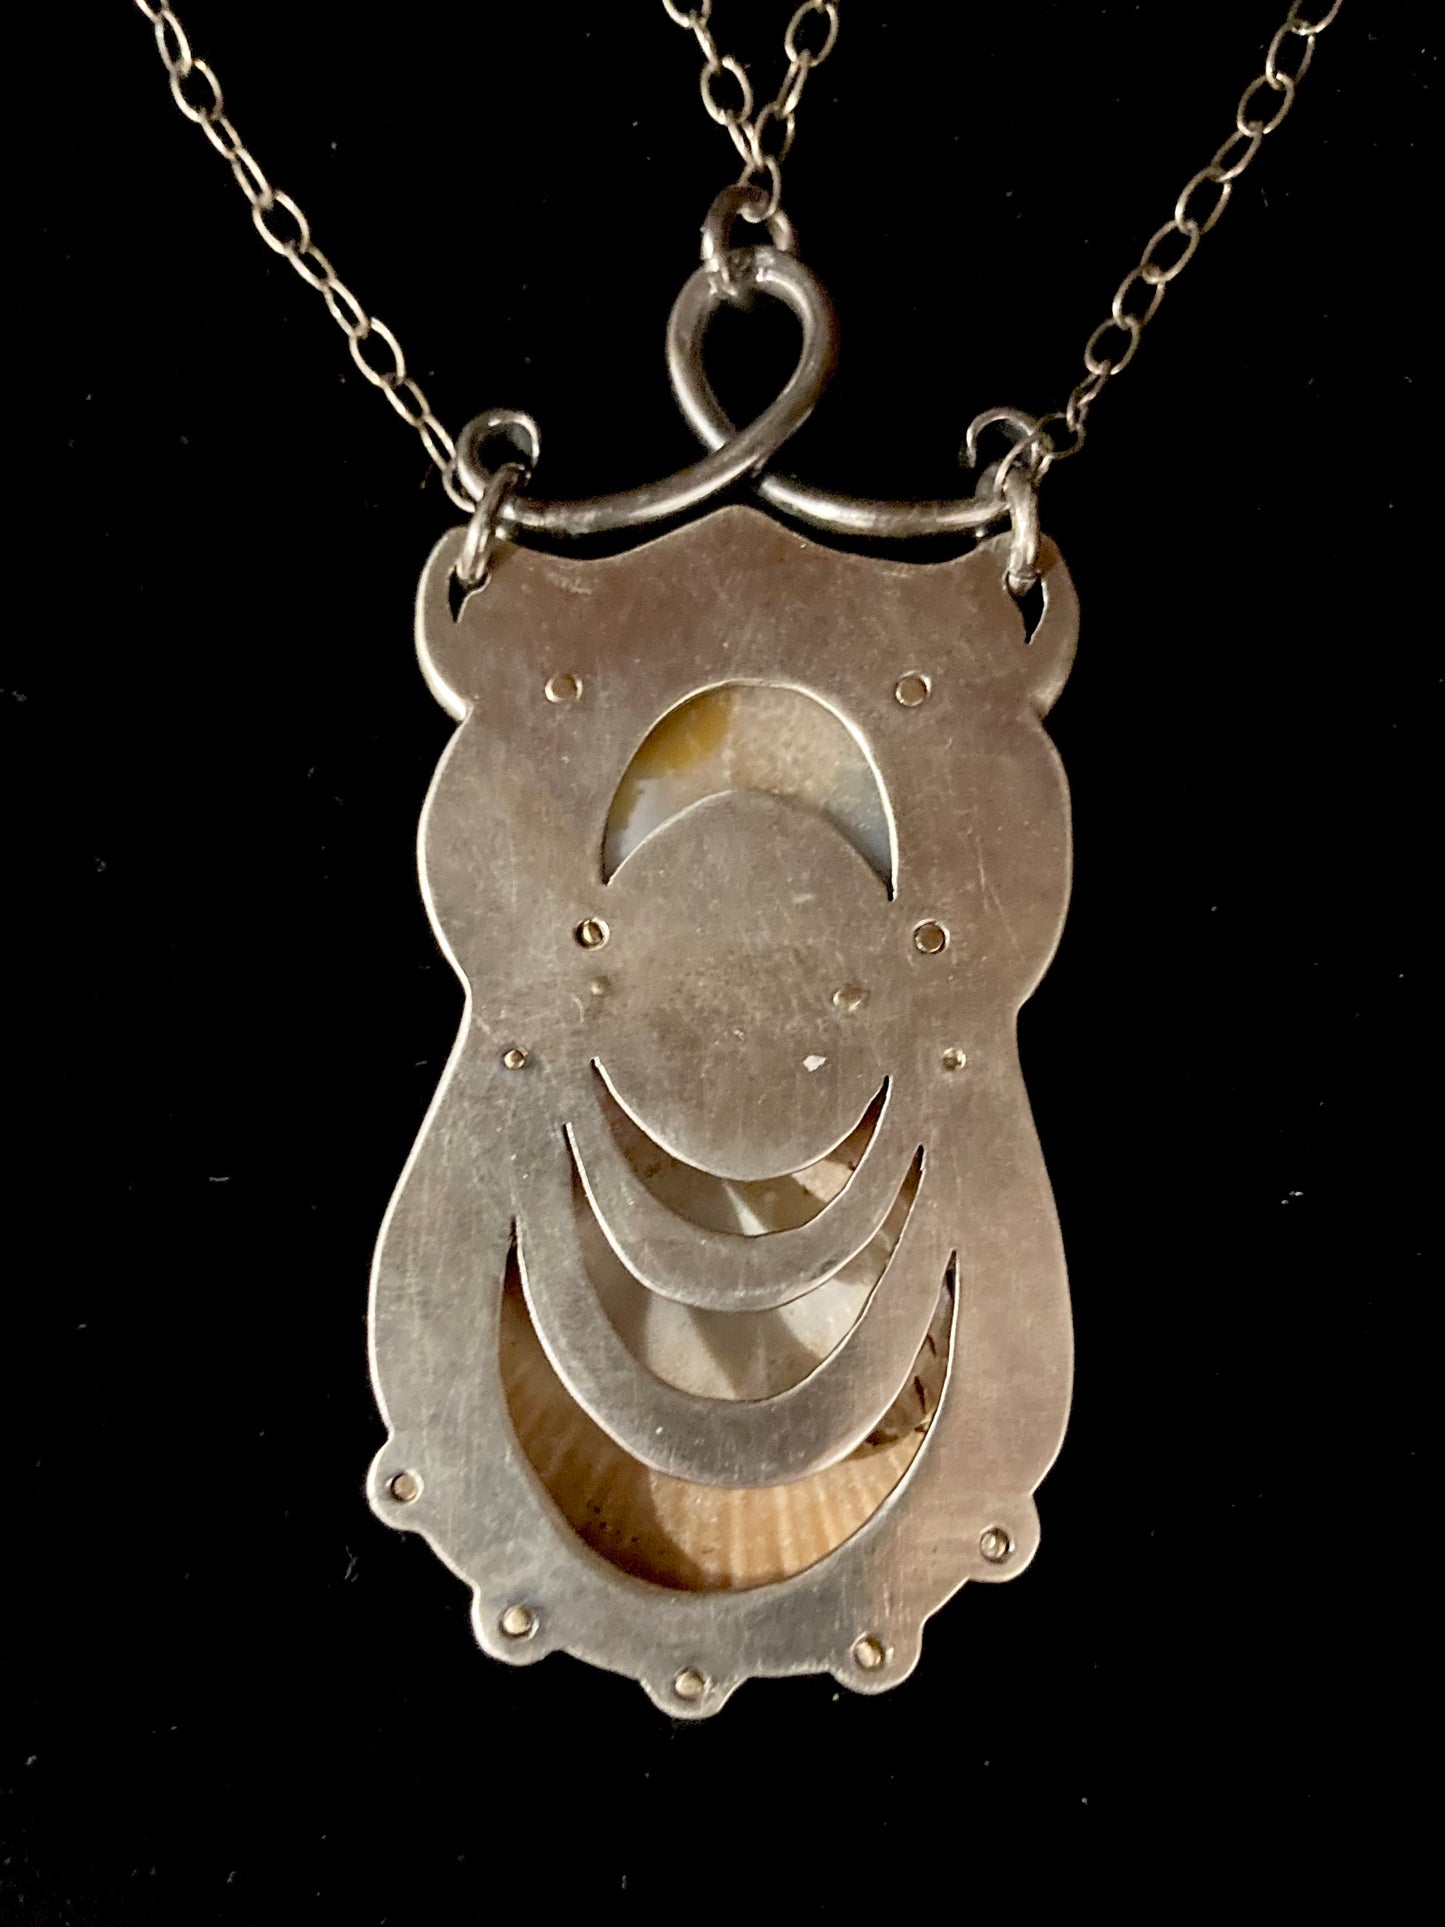 Scallop Shell and Druzy Necklace in Sterling Silver with 14K Gold Accents